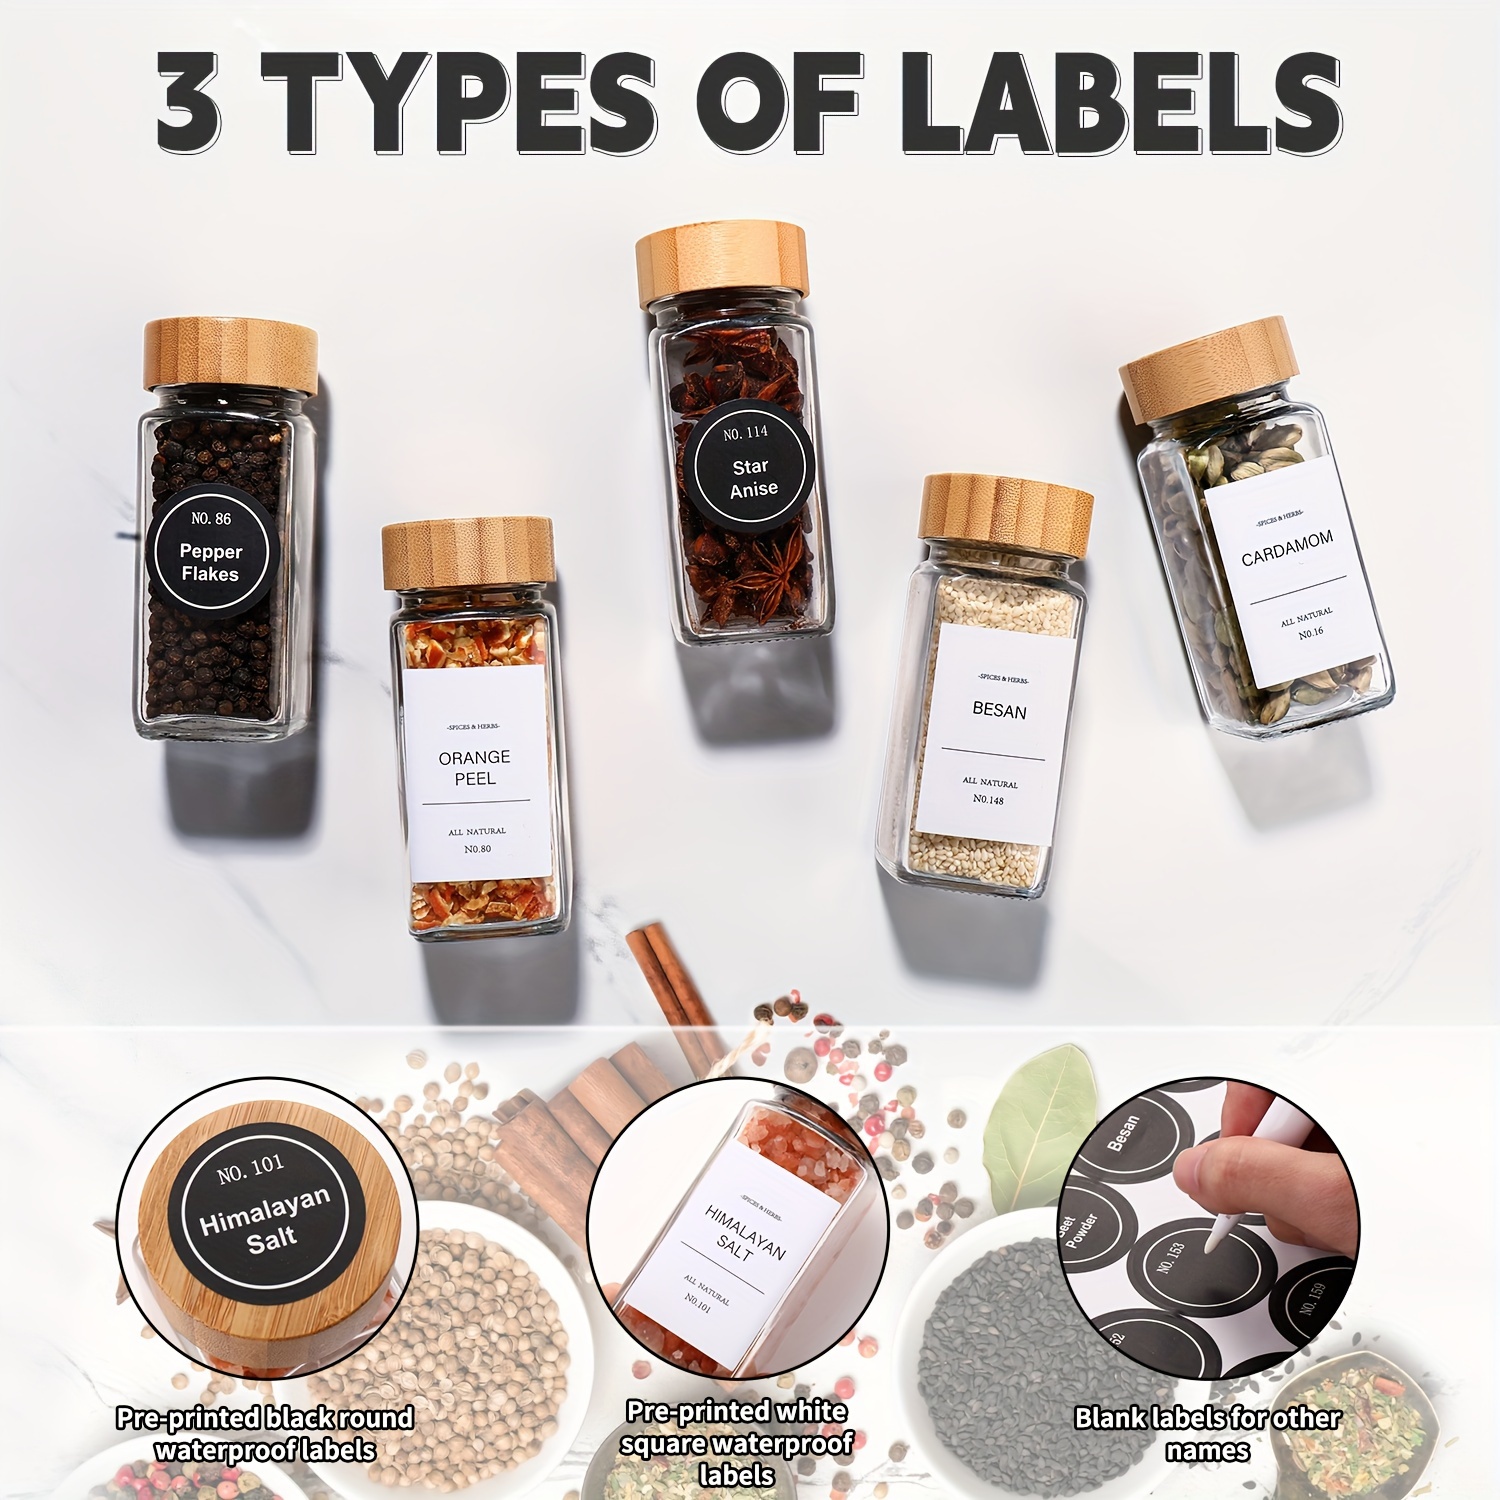 spice jars with labels 4 oz